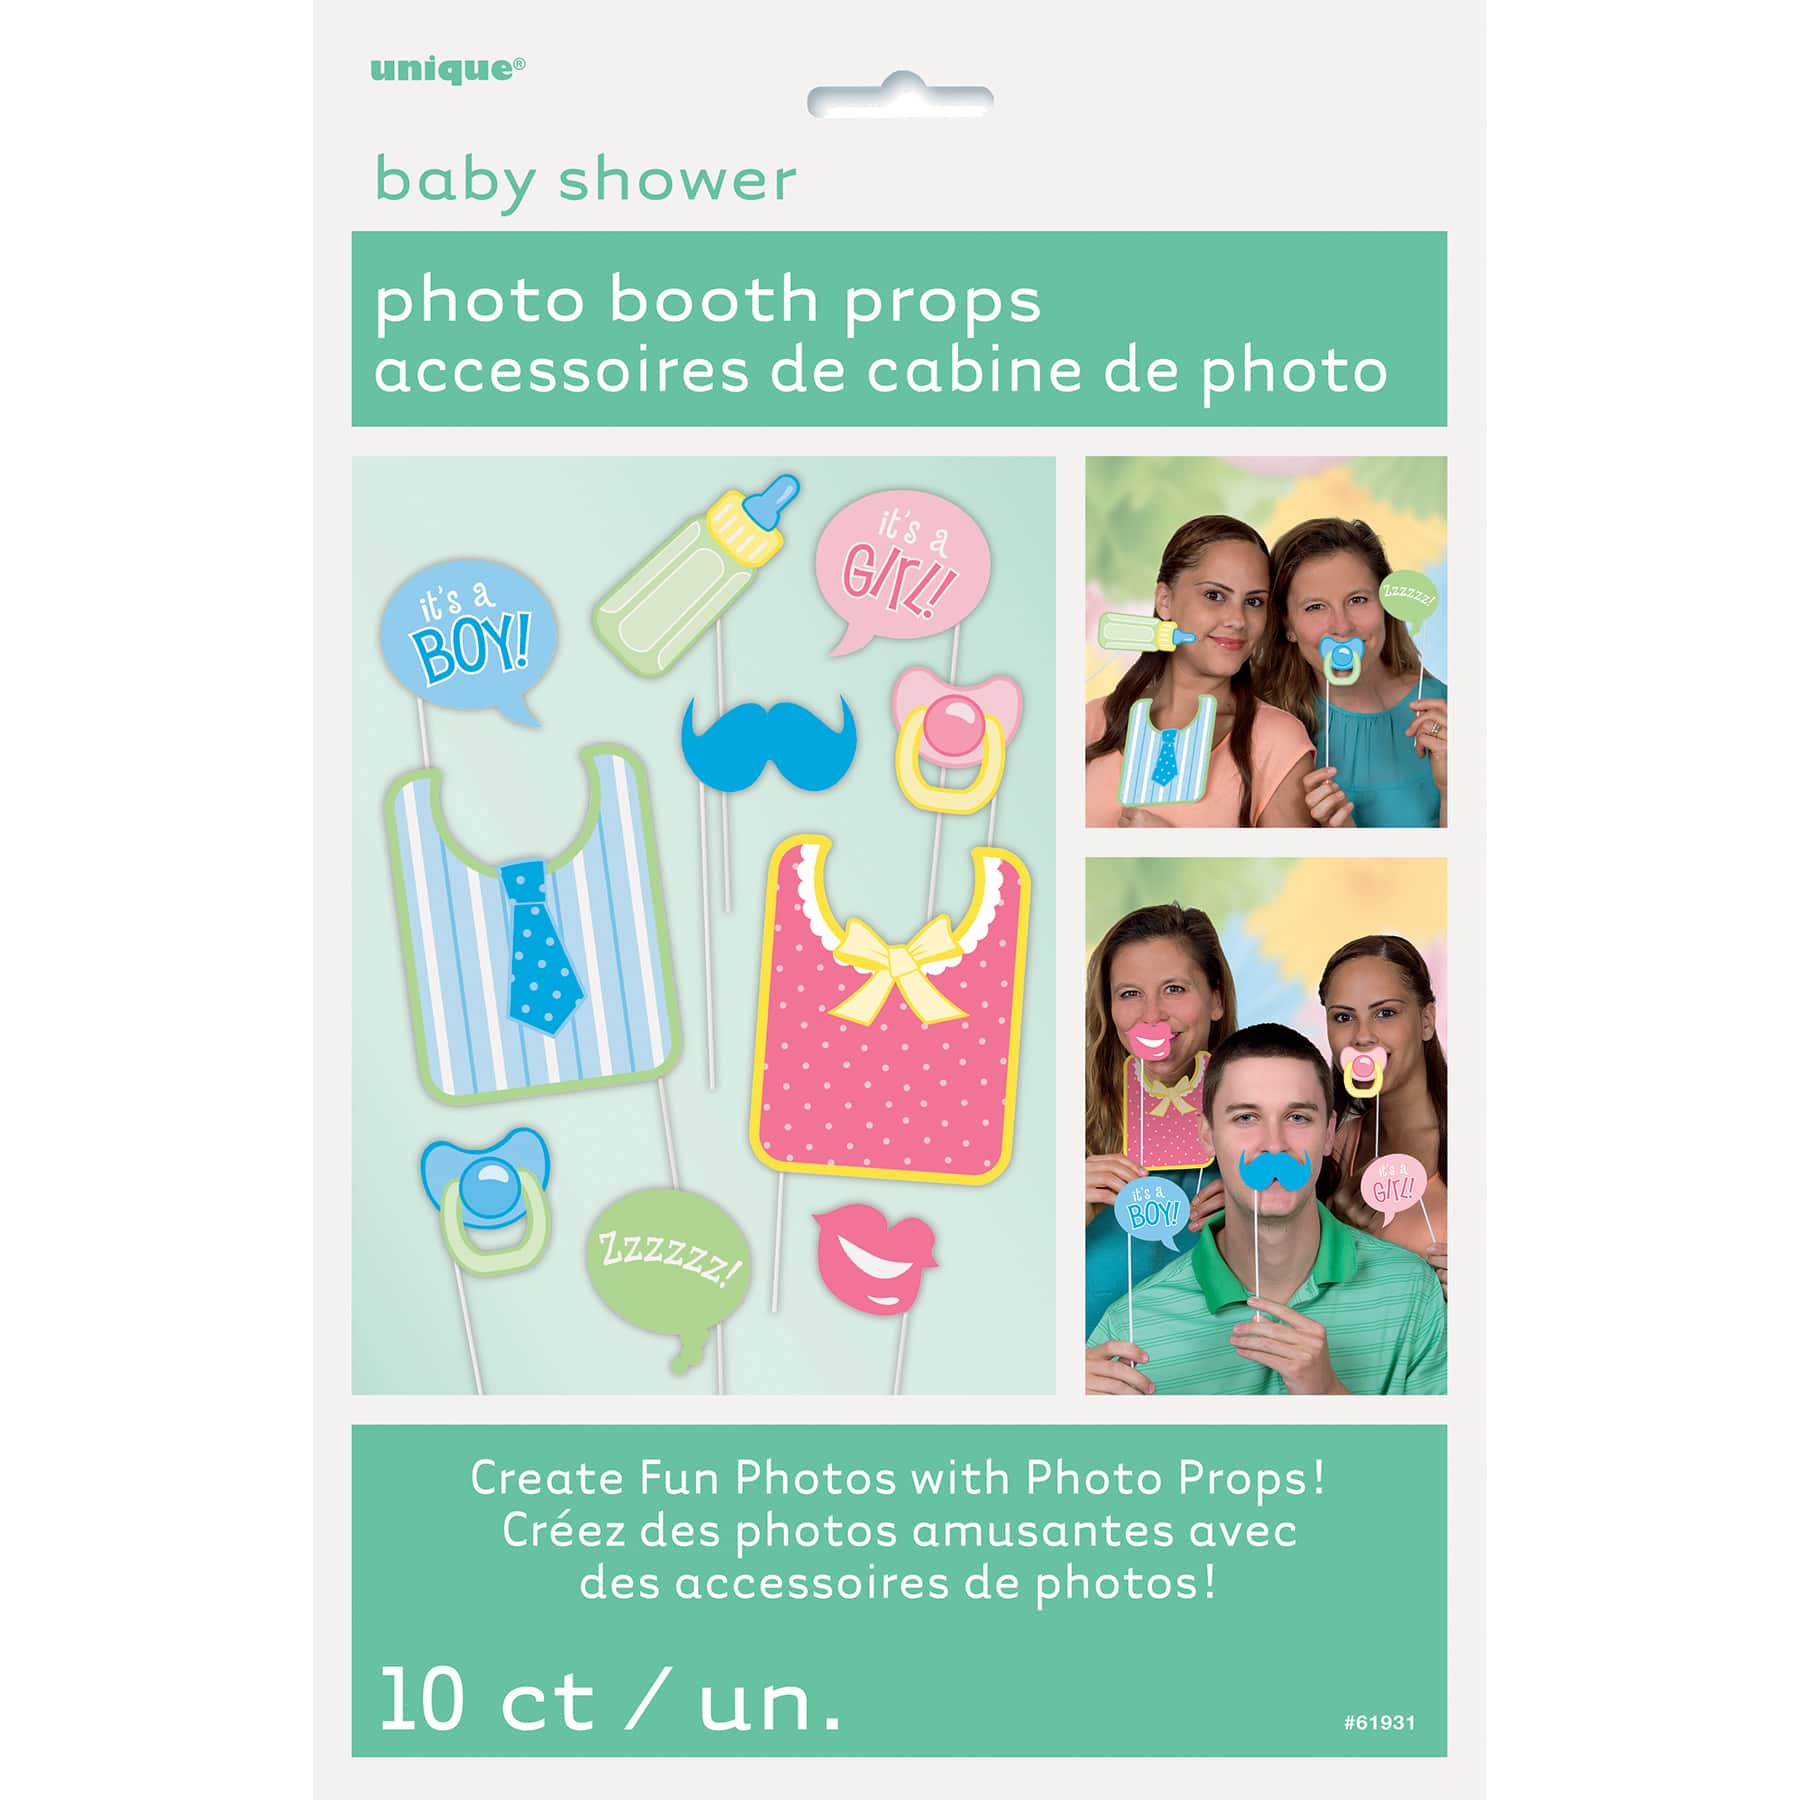 baby shower props shop near me